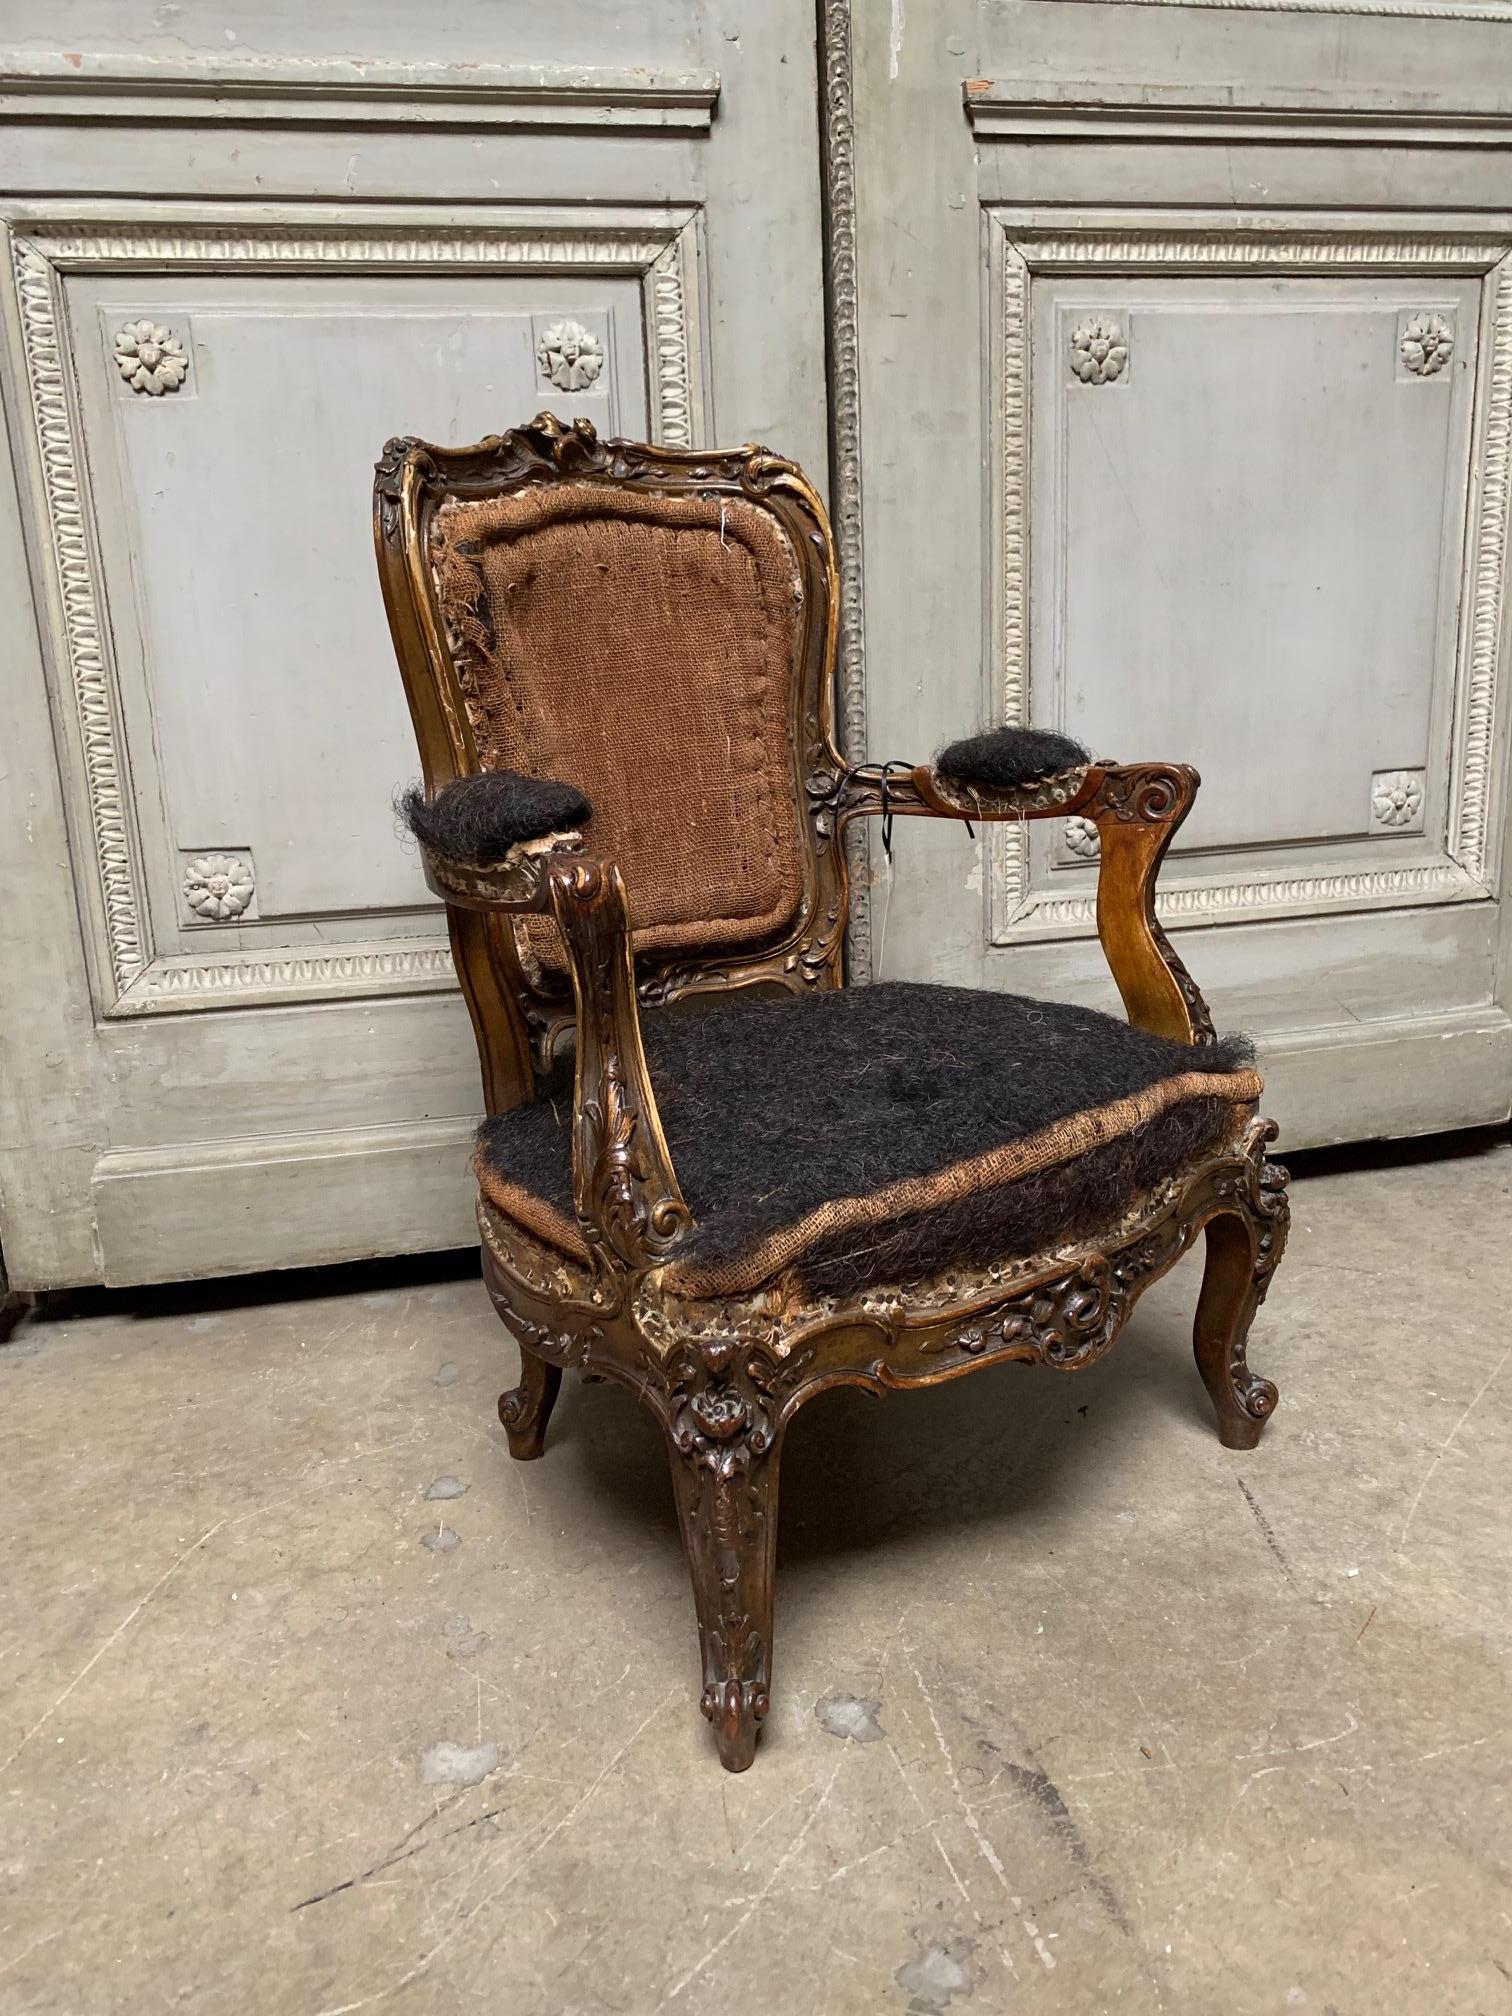 This charming 19th century French Louis XV style diminutive child's armchair features a sculptural giltwood fame carved with scrolls, leaf work and rosettes.
The fauteuil has the original upholstery padding and horsehair.